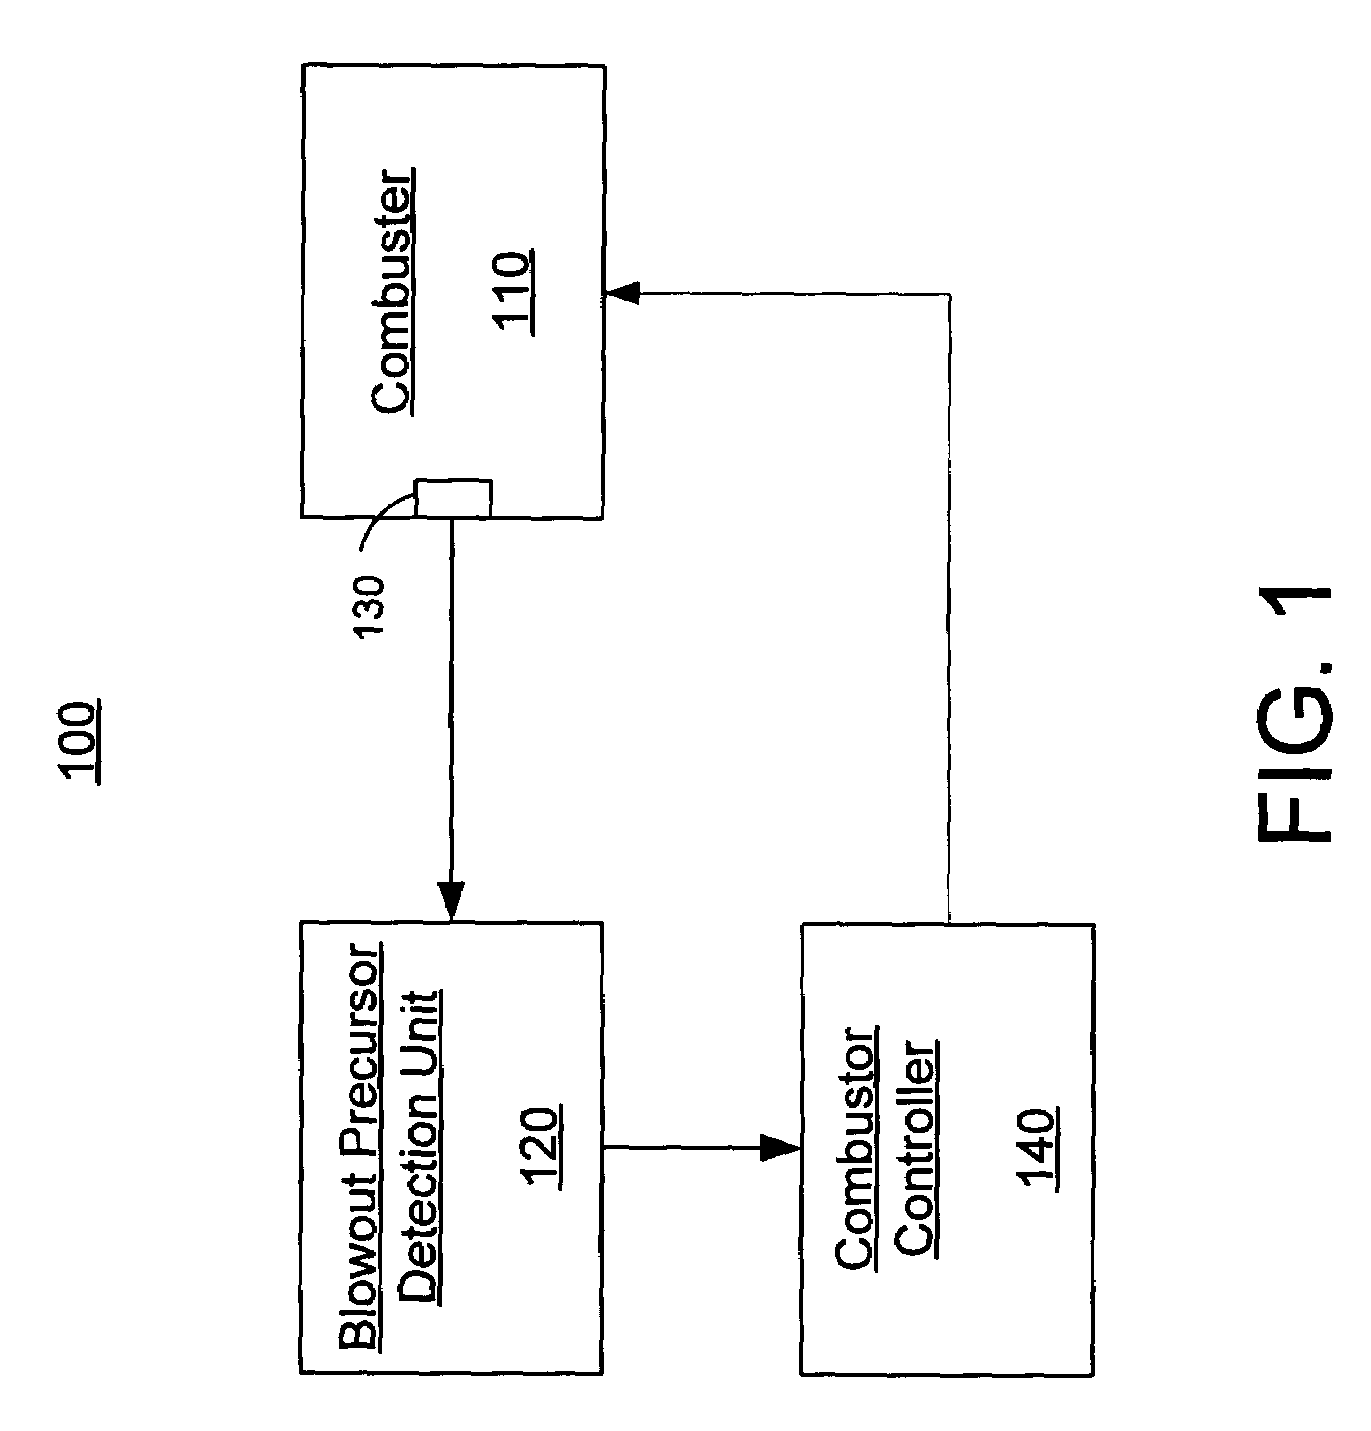 Systems and methods for detection of blowout precursors in combustors